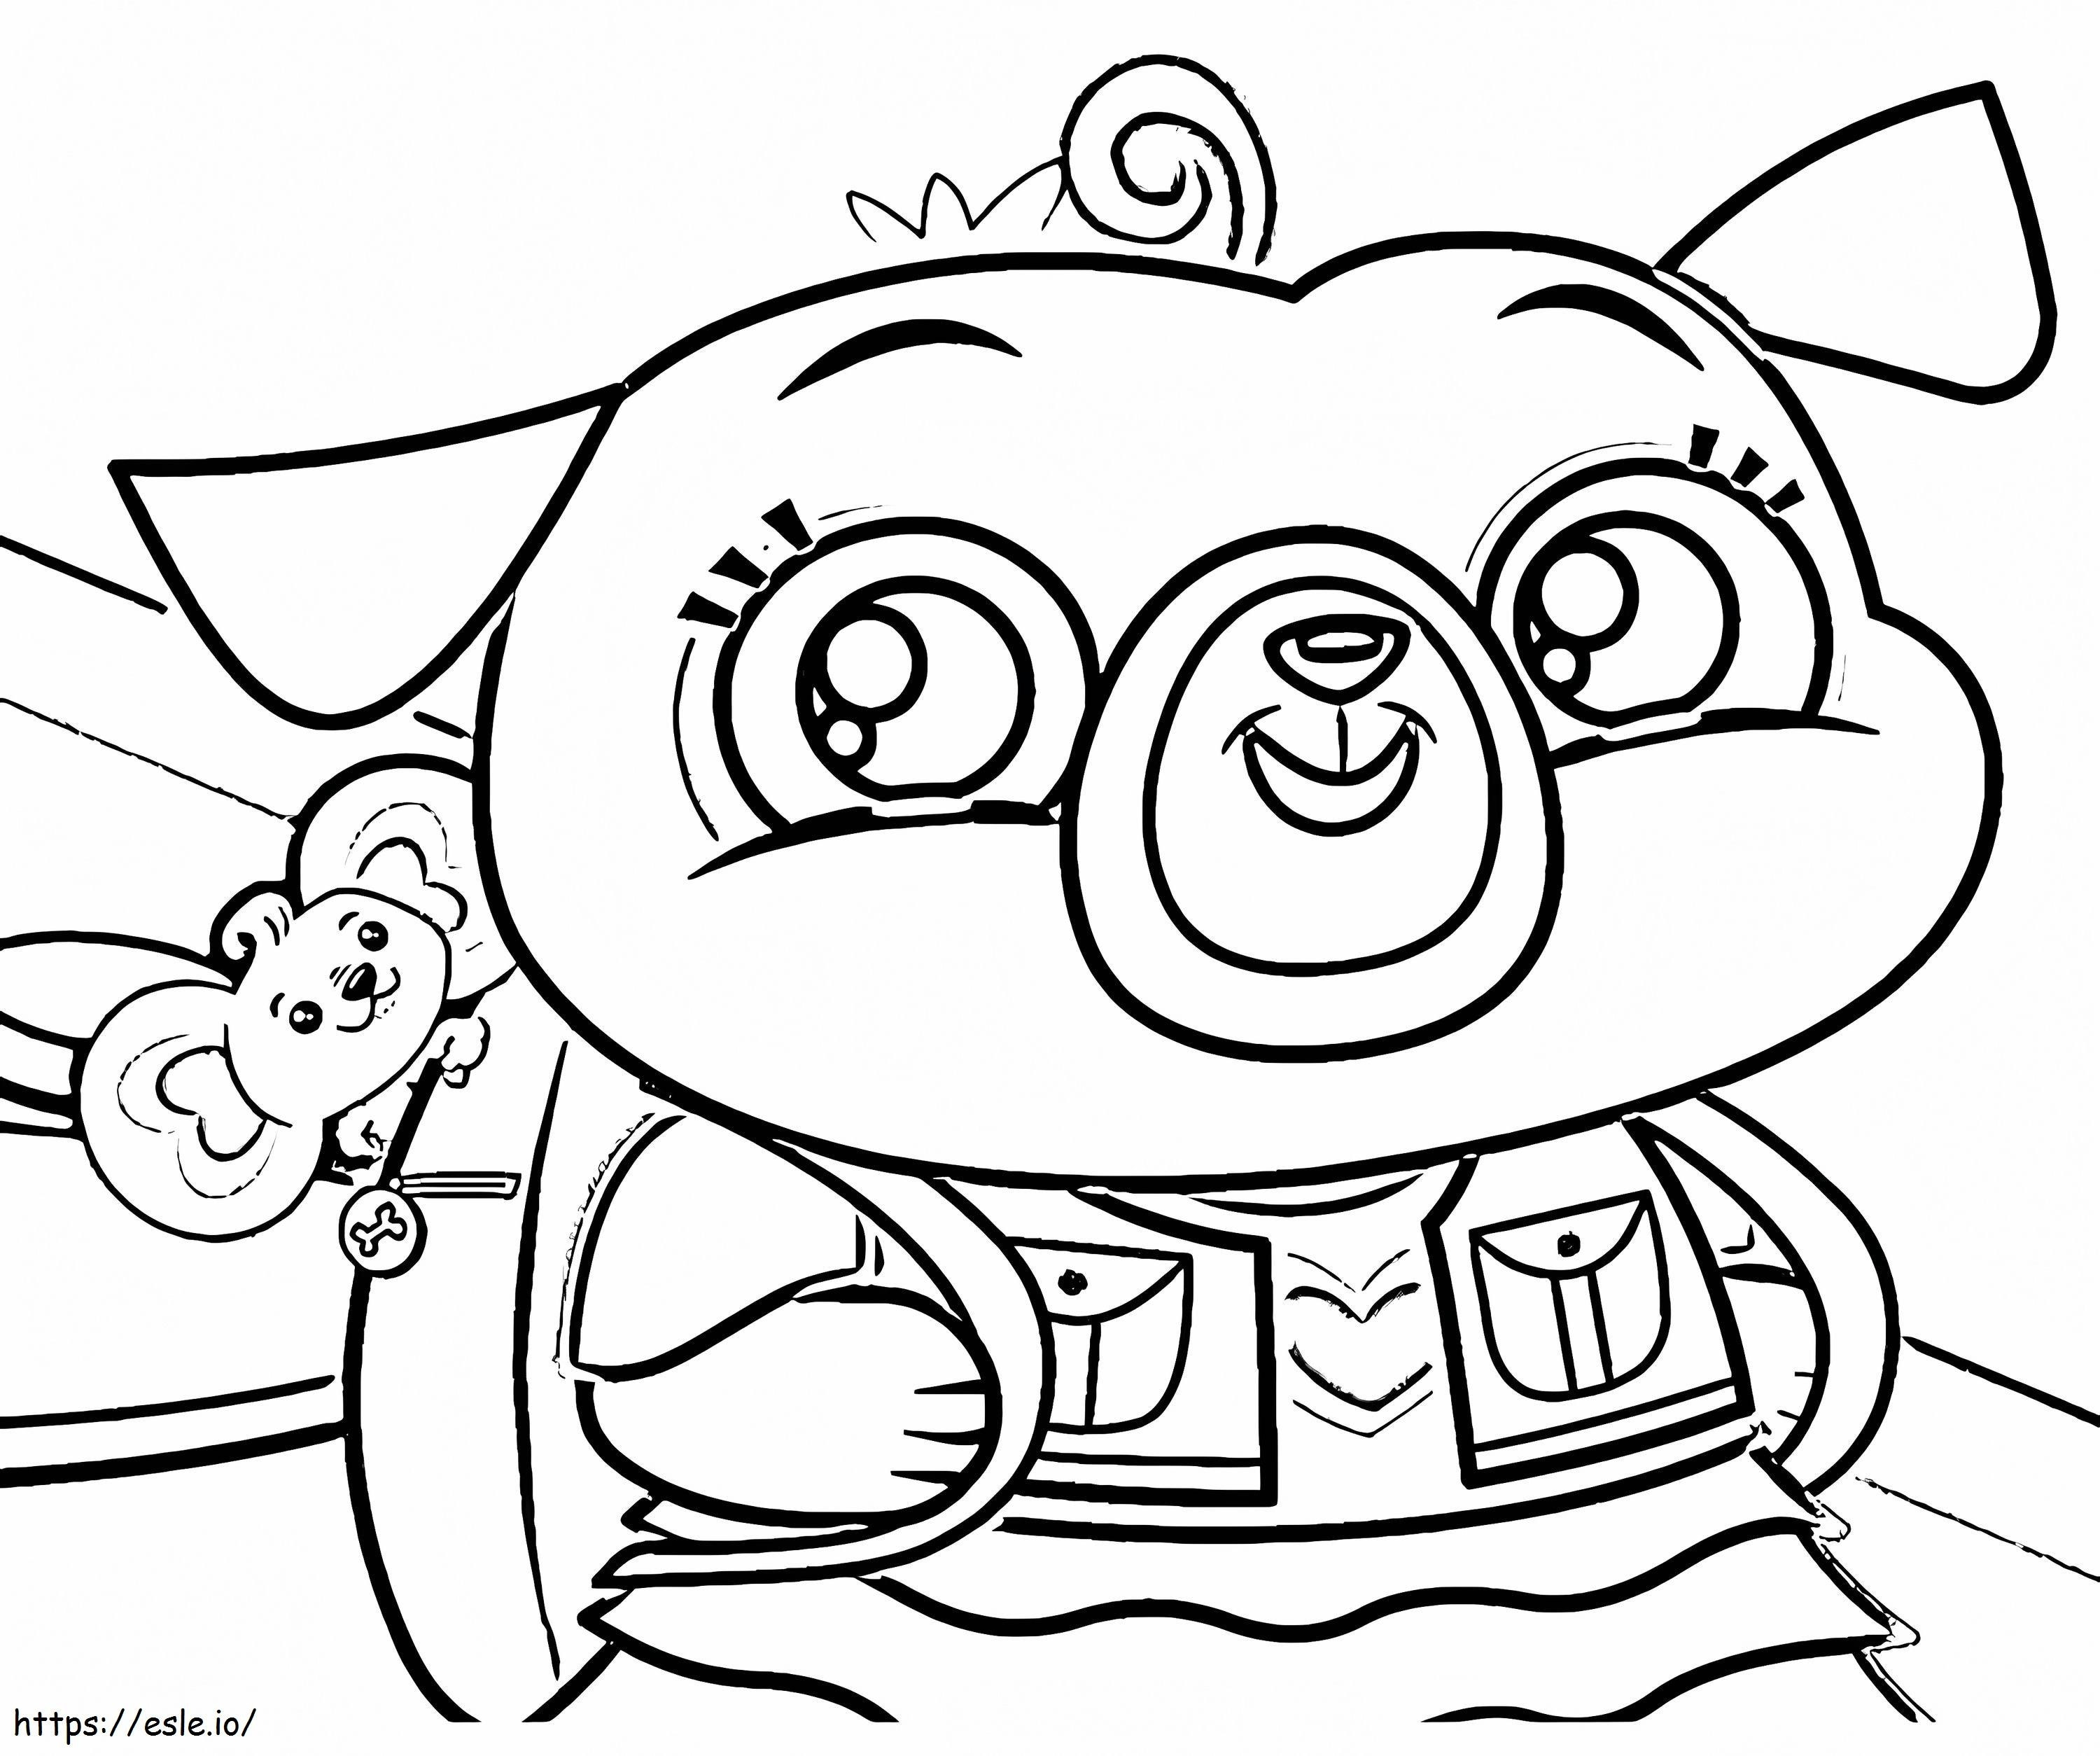 Chip And Potato 2 coloring page